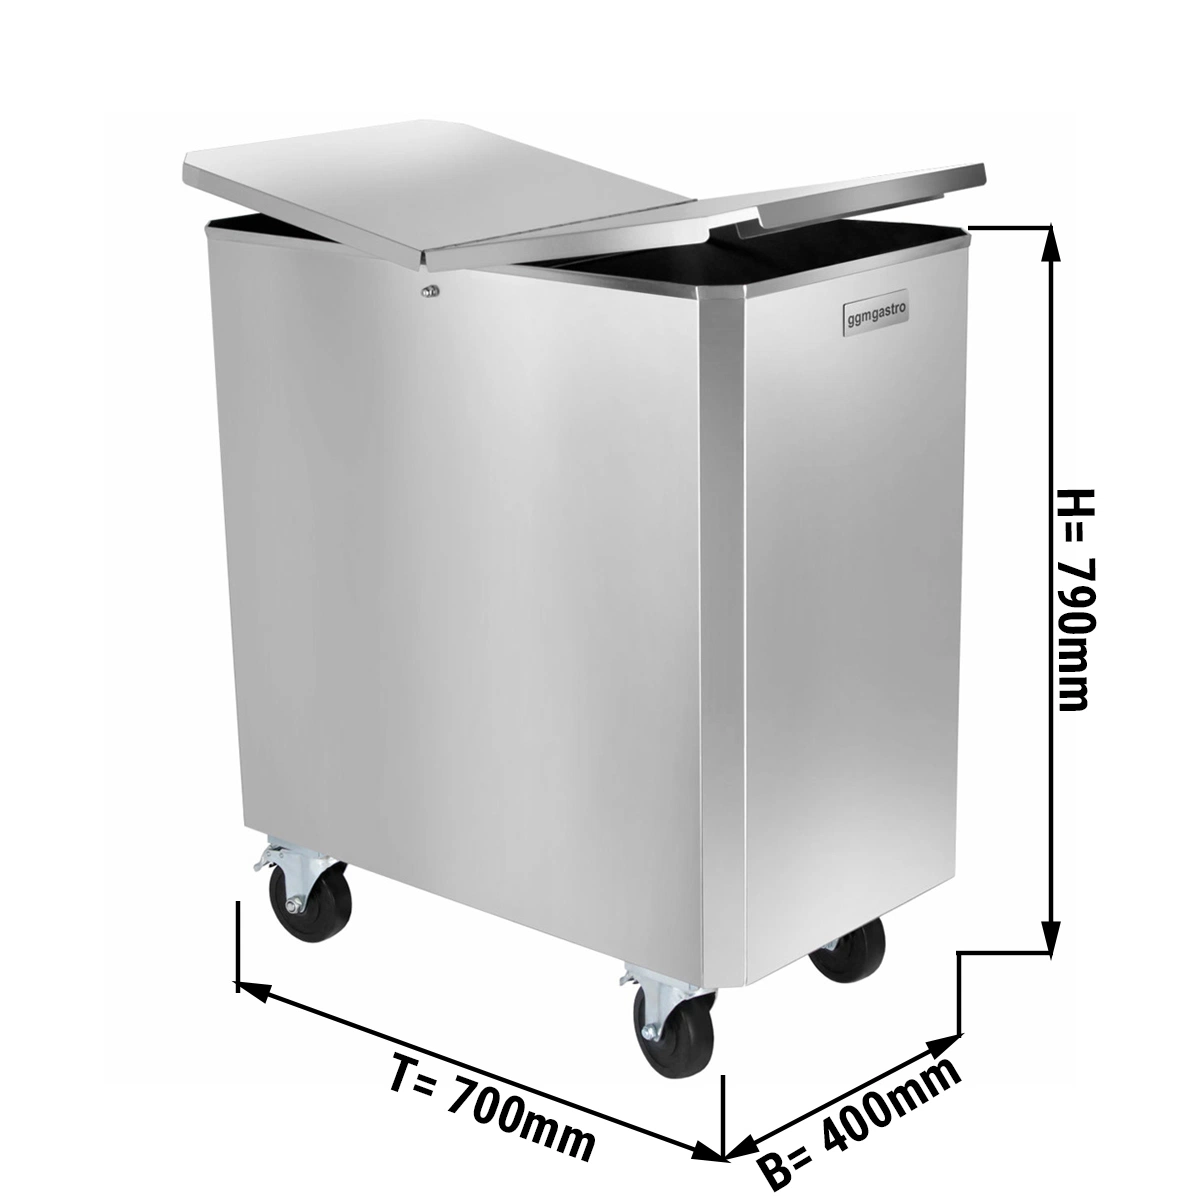 Kitchen Usage L Rectangular Thin Lid Trash Can Household Recycle Trash Can Hotel Rubbish Bins